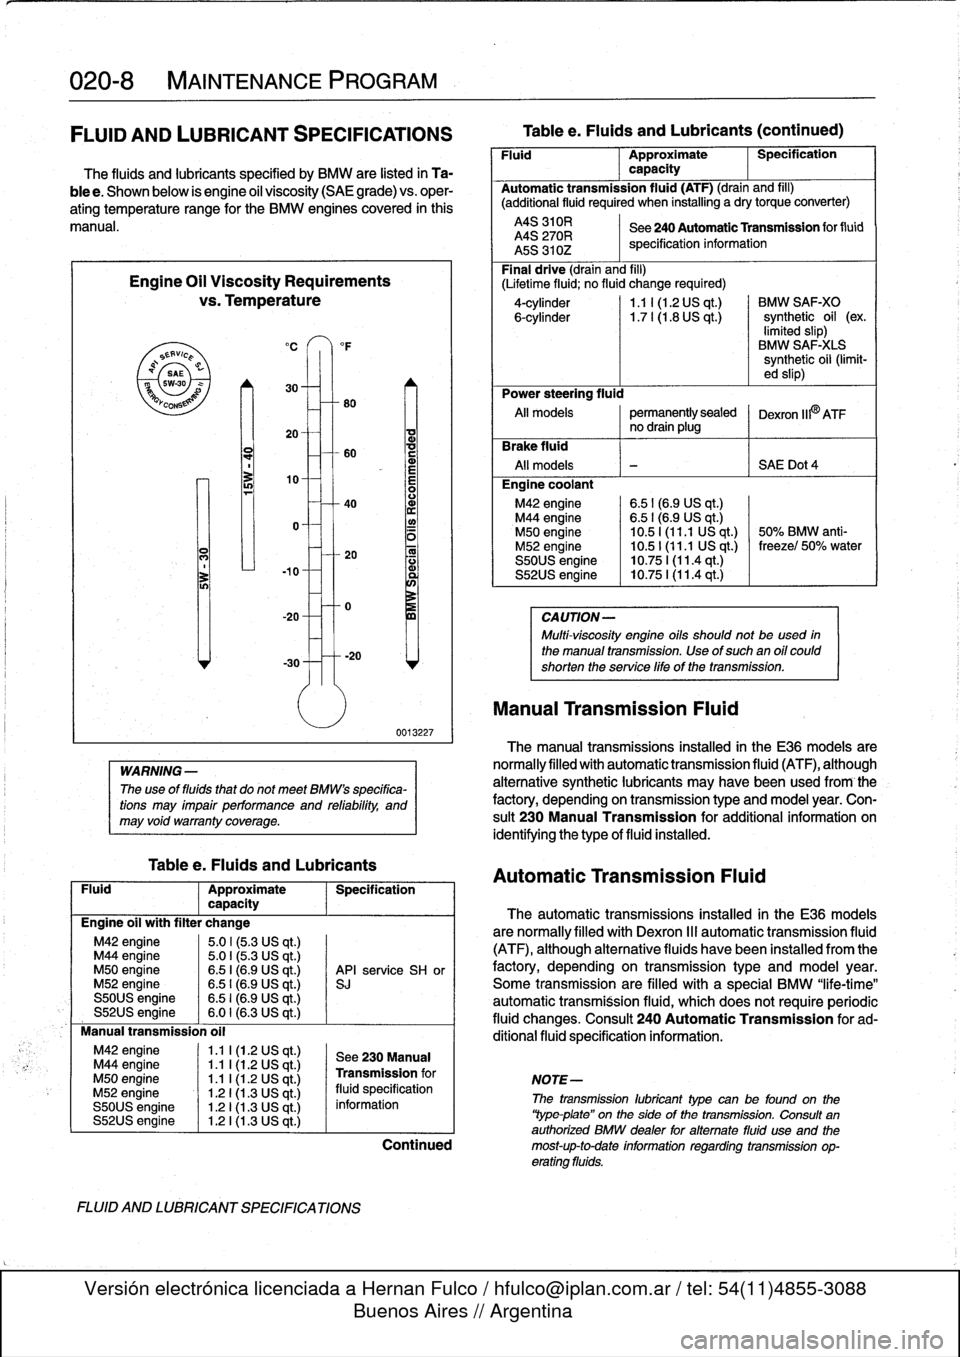 BMW M3 1993 E36 Workshop Manual 
020-
8

	

MAINTENANCE
PROGRAM

FLUID
AND
LUBRICANT
SPECIFICATIONS
The
fluids
and
lubricante
specified
by
BMW
are
listed
in
Ta-

ble
e
.
Shown
below
is
engine
oil
viscosity
(SAE
grade)
vs
.
oper-

at